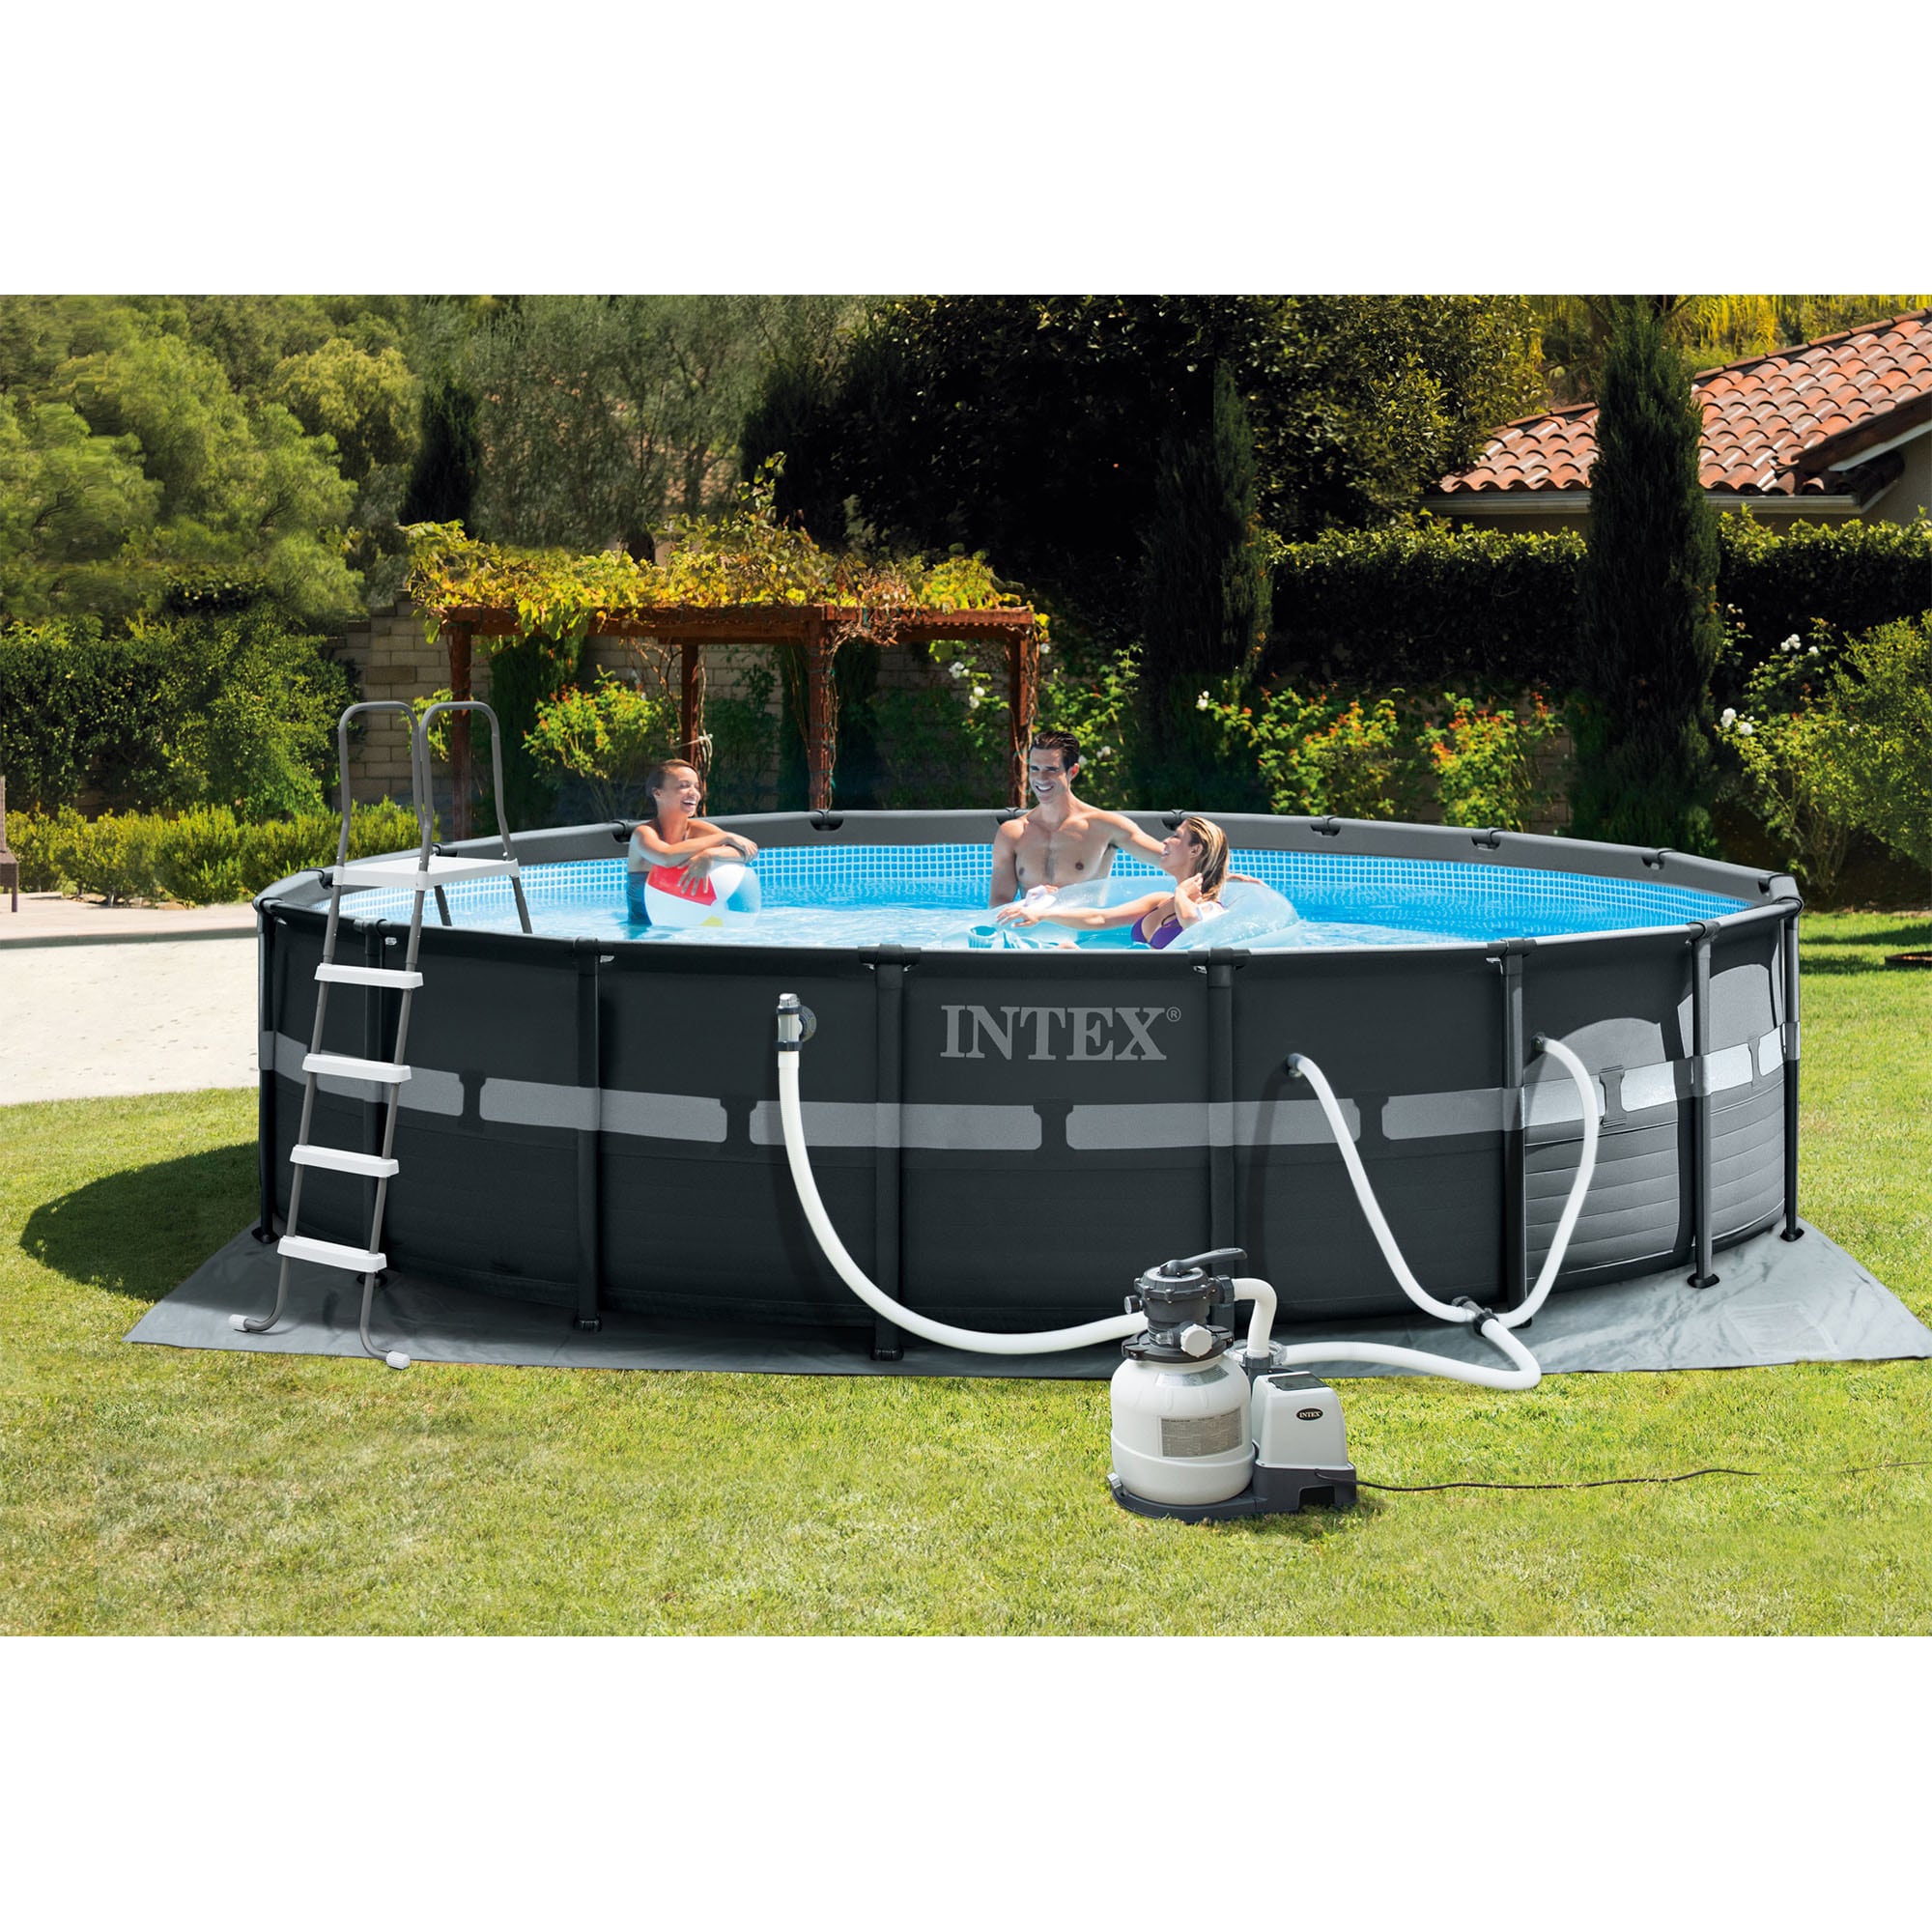 Intex Ultra XTR 18-ft x 18-ft x Steel Panels Round Above-Ground Pool with Filter Pump,Ground Cloth,Pool Cover and Ladder in the Above-Ground Pools department at Lowes.com